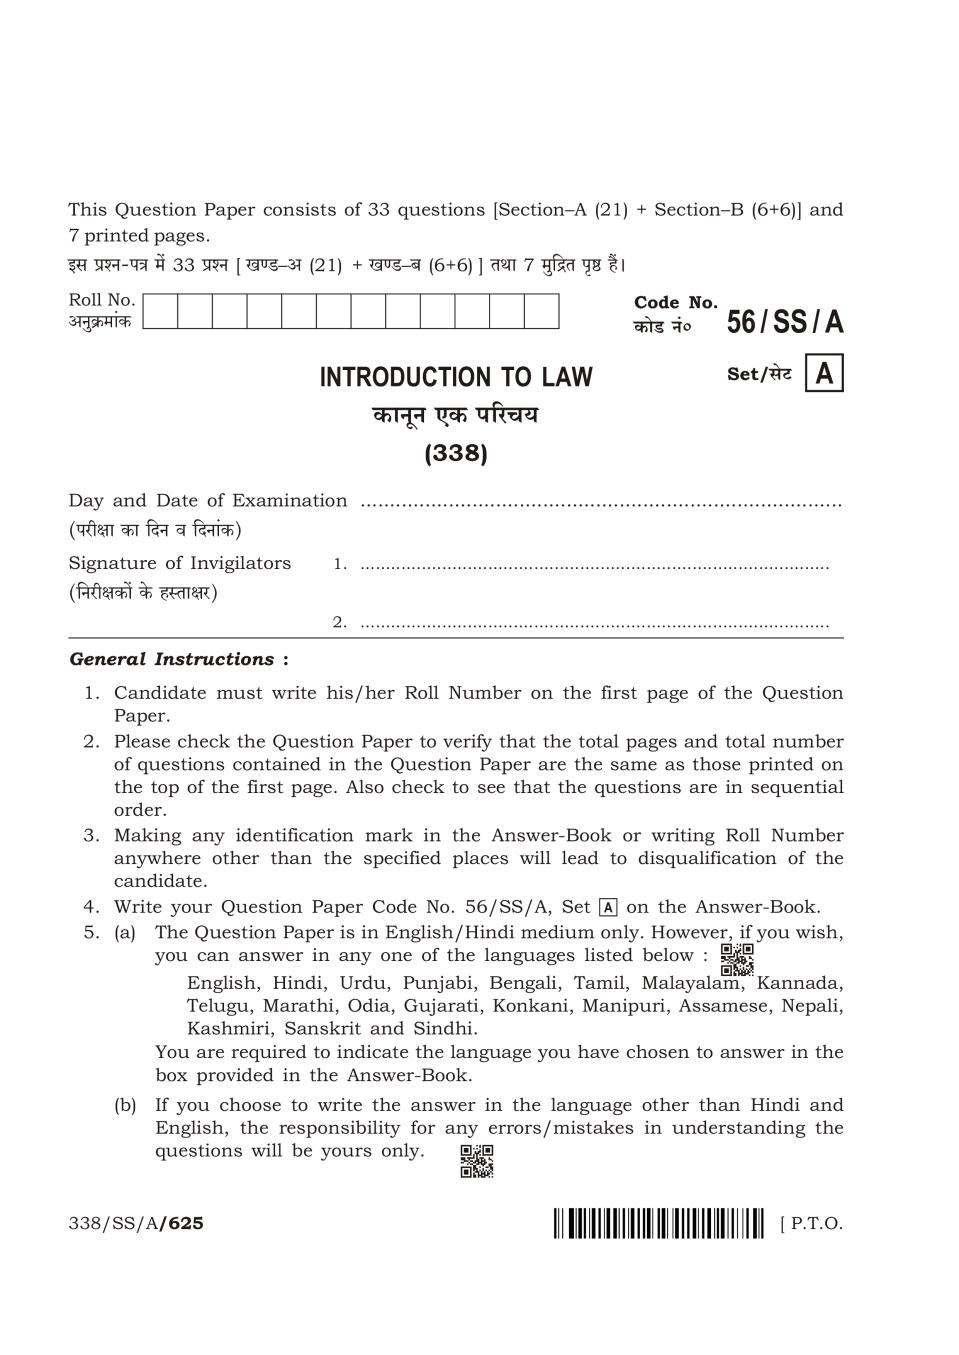 NIOS Class 12 Question Paper Apr 2018 - Introduction to Law - Page 1